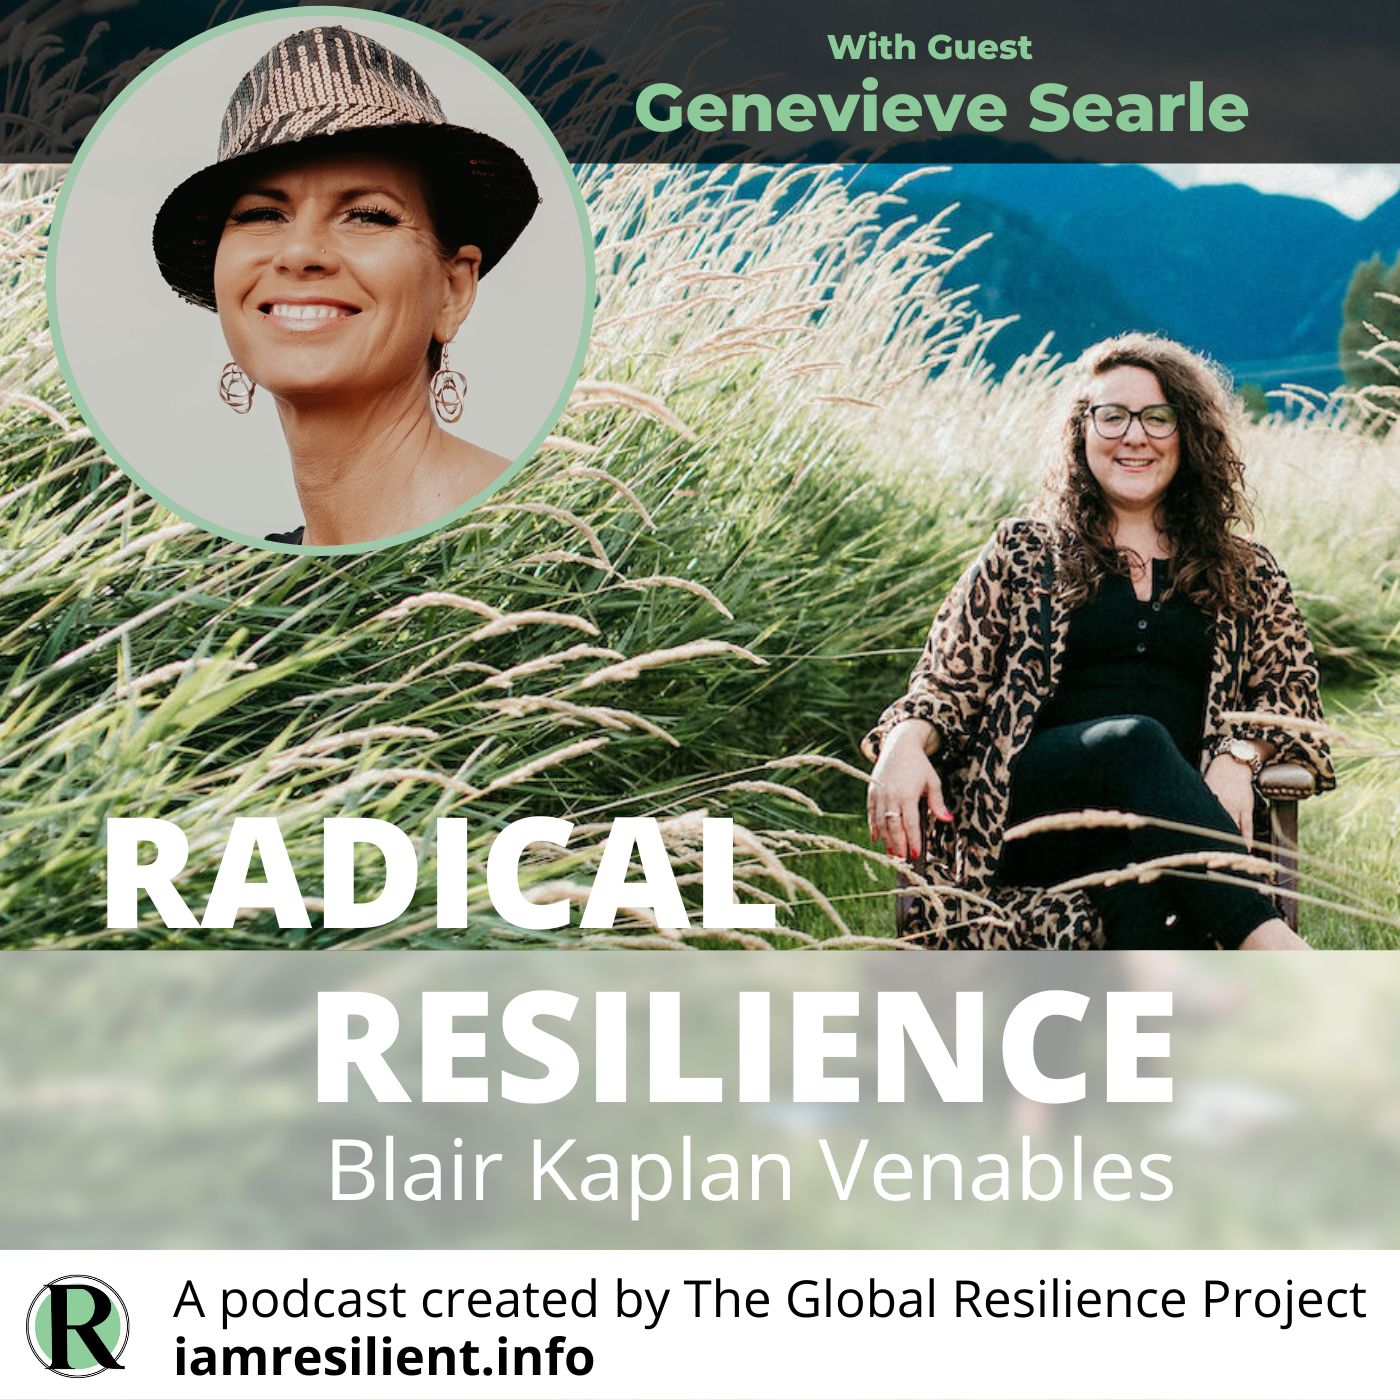 The Elixer of Potential with Genevieve Searle